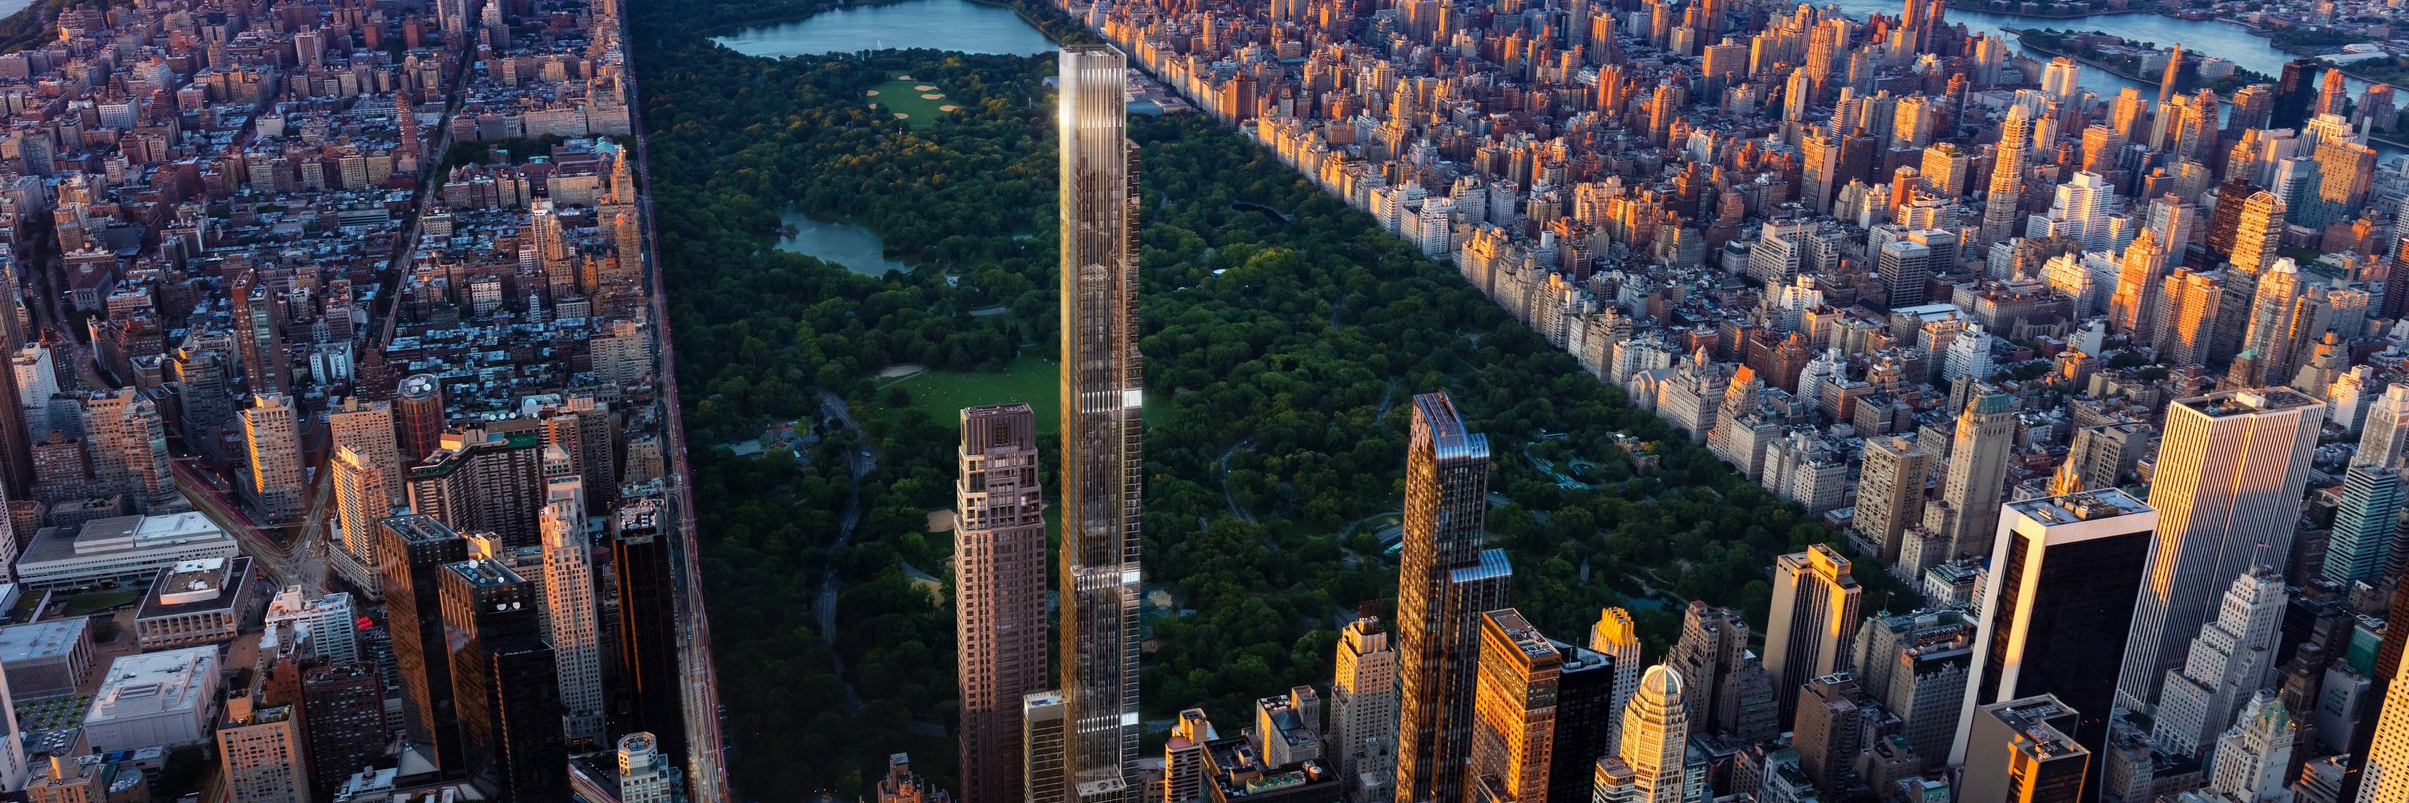 Exterior aerial view of Central Park Tower condominiums with surrounding New York City and Central Park.